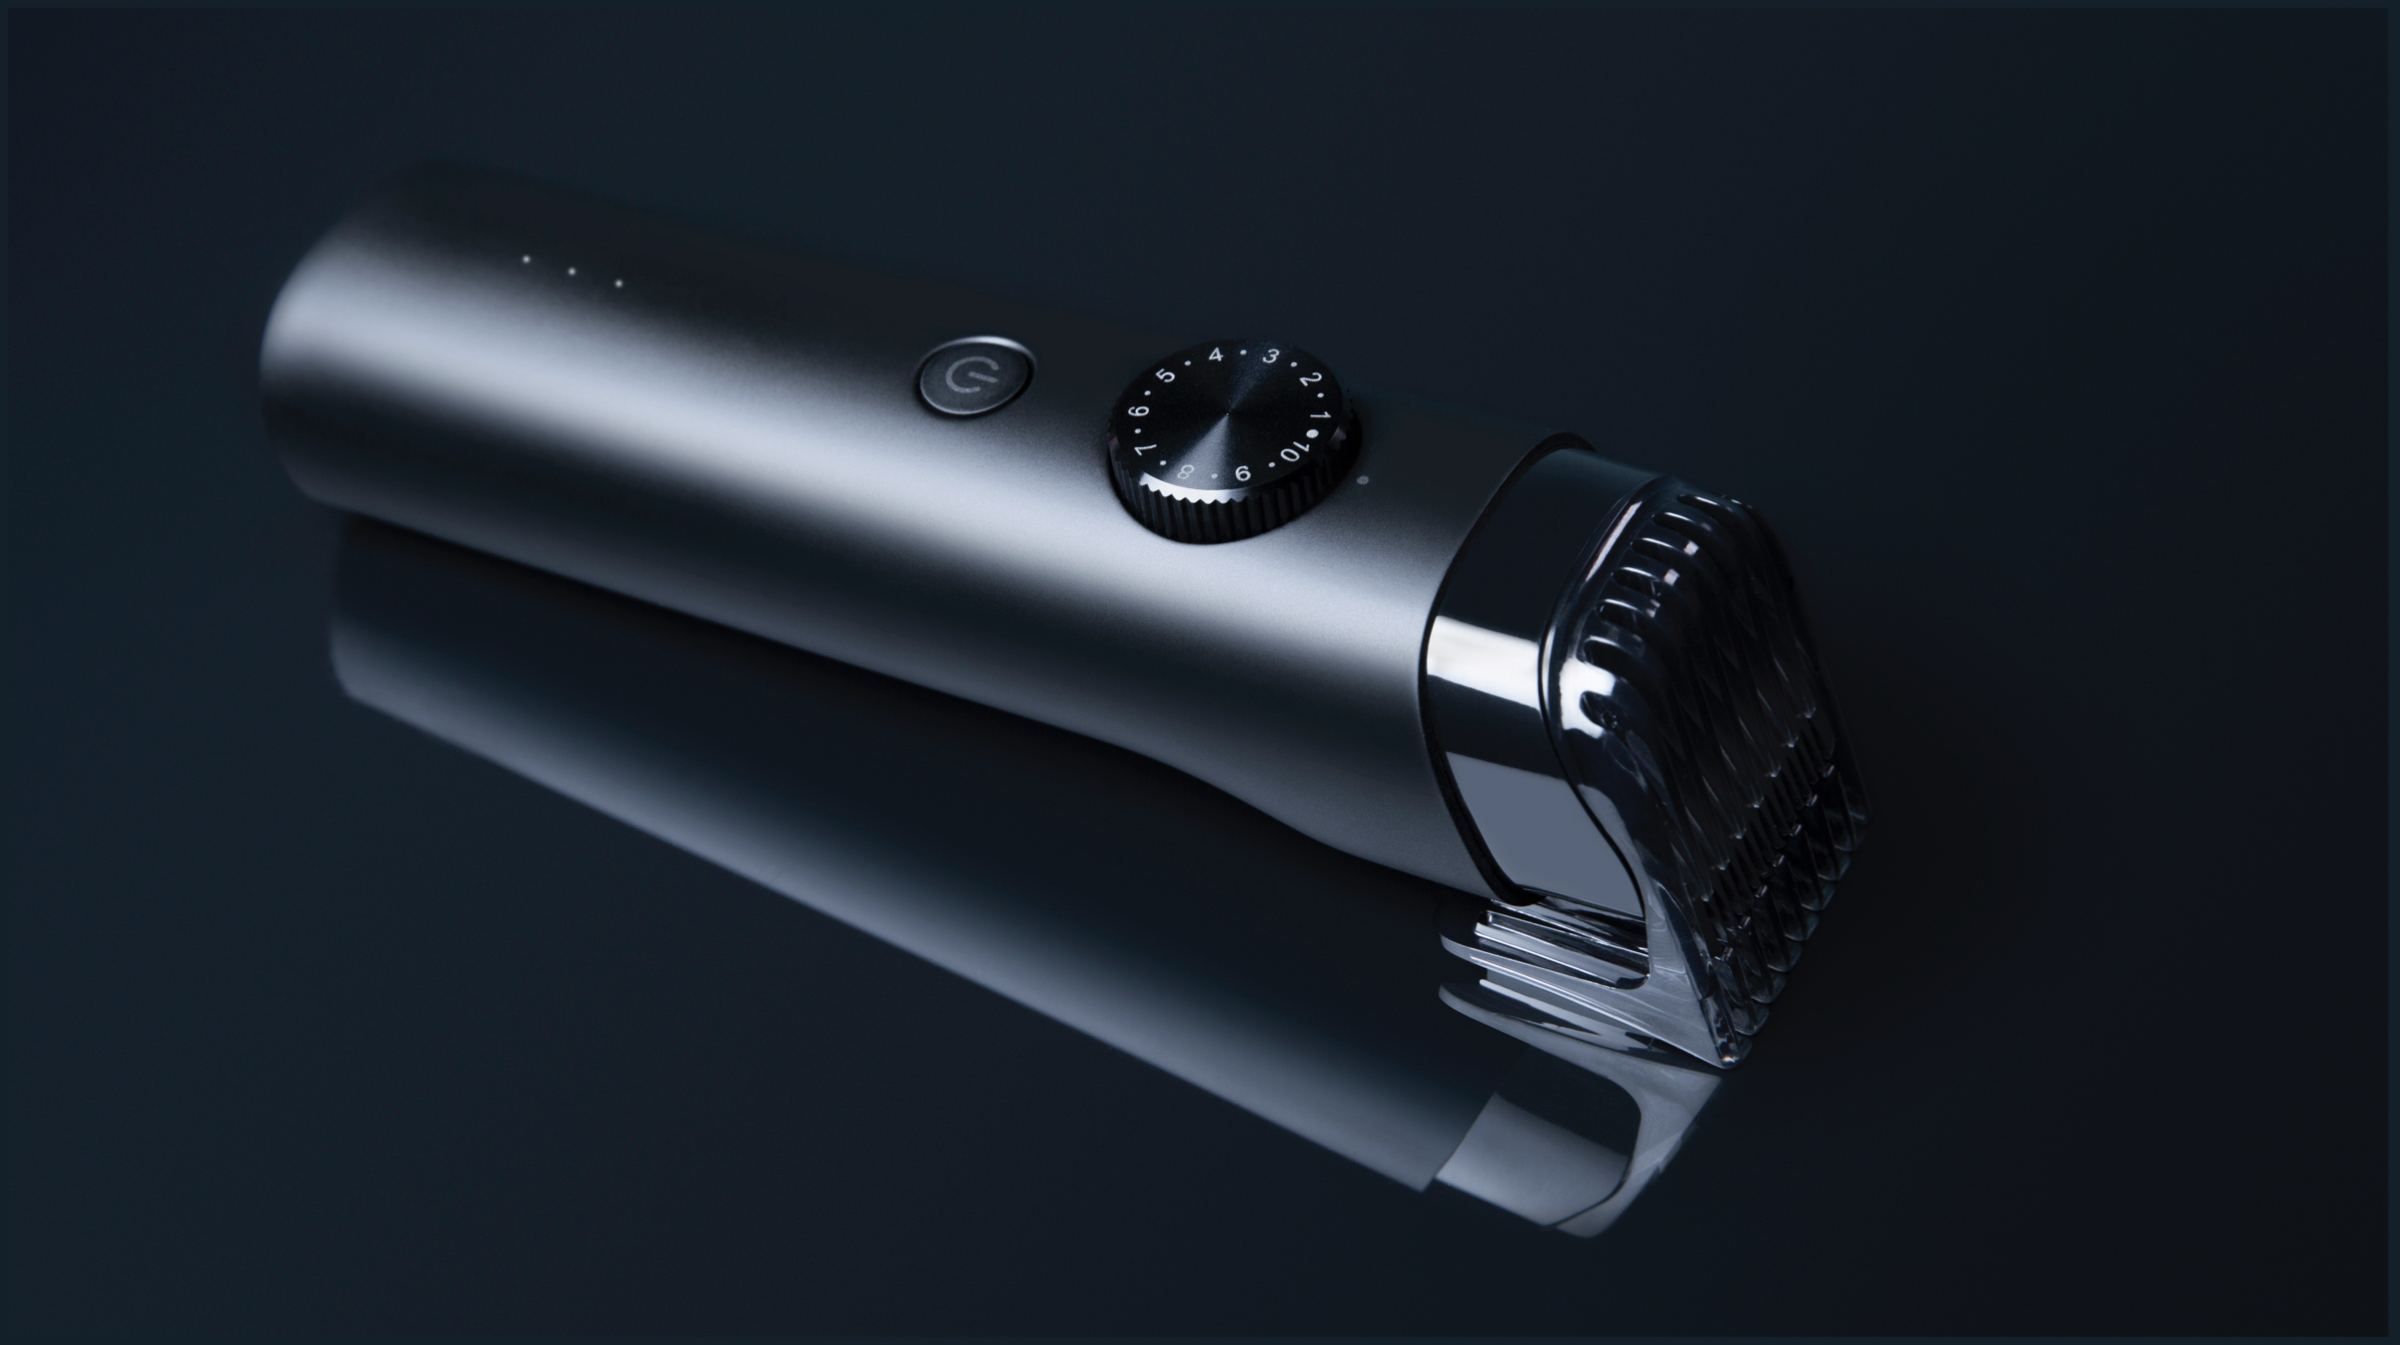 Mi Beard Trimmer Launched India, Price, Features | iGyaan Network